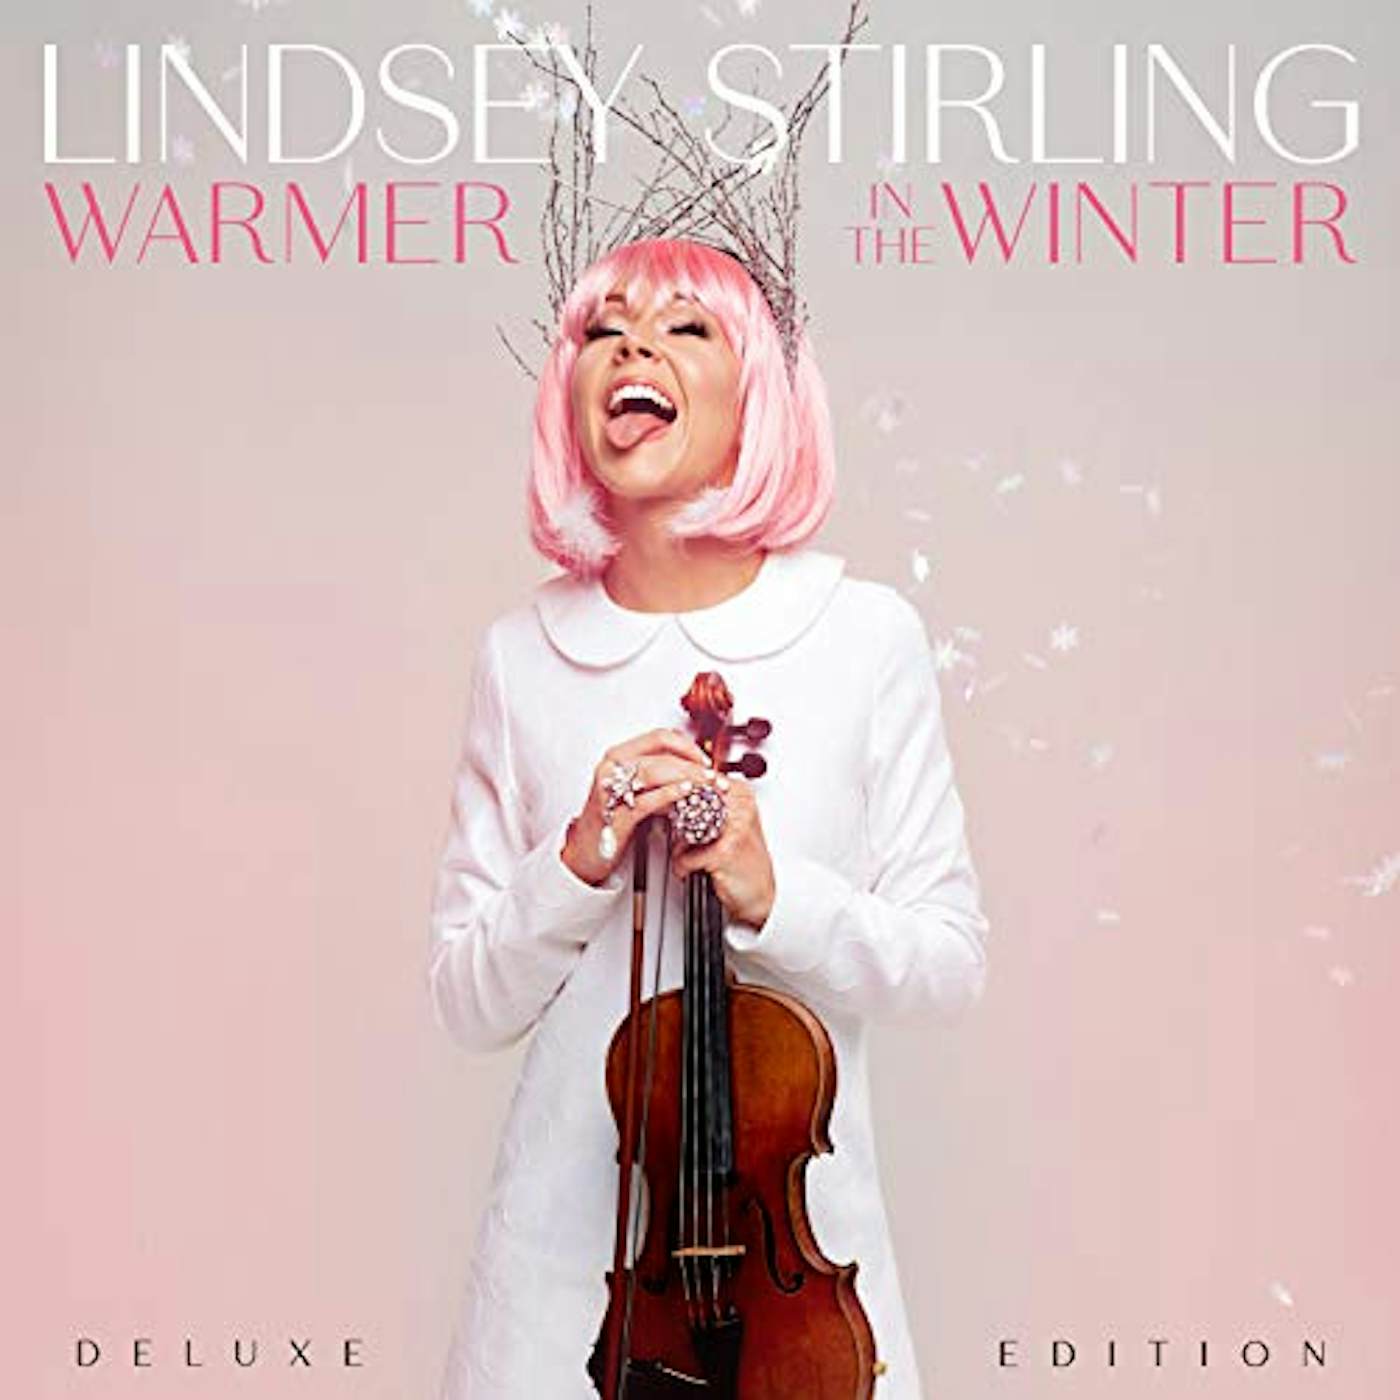 Lindsey Stirling Warmer In The Winter Vinyl Record